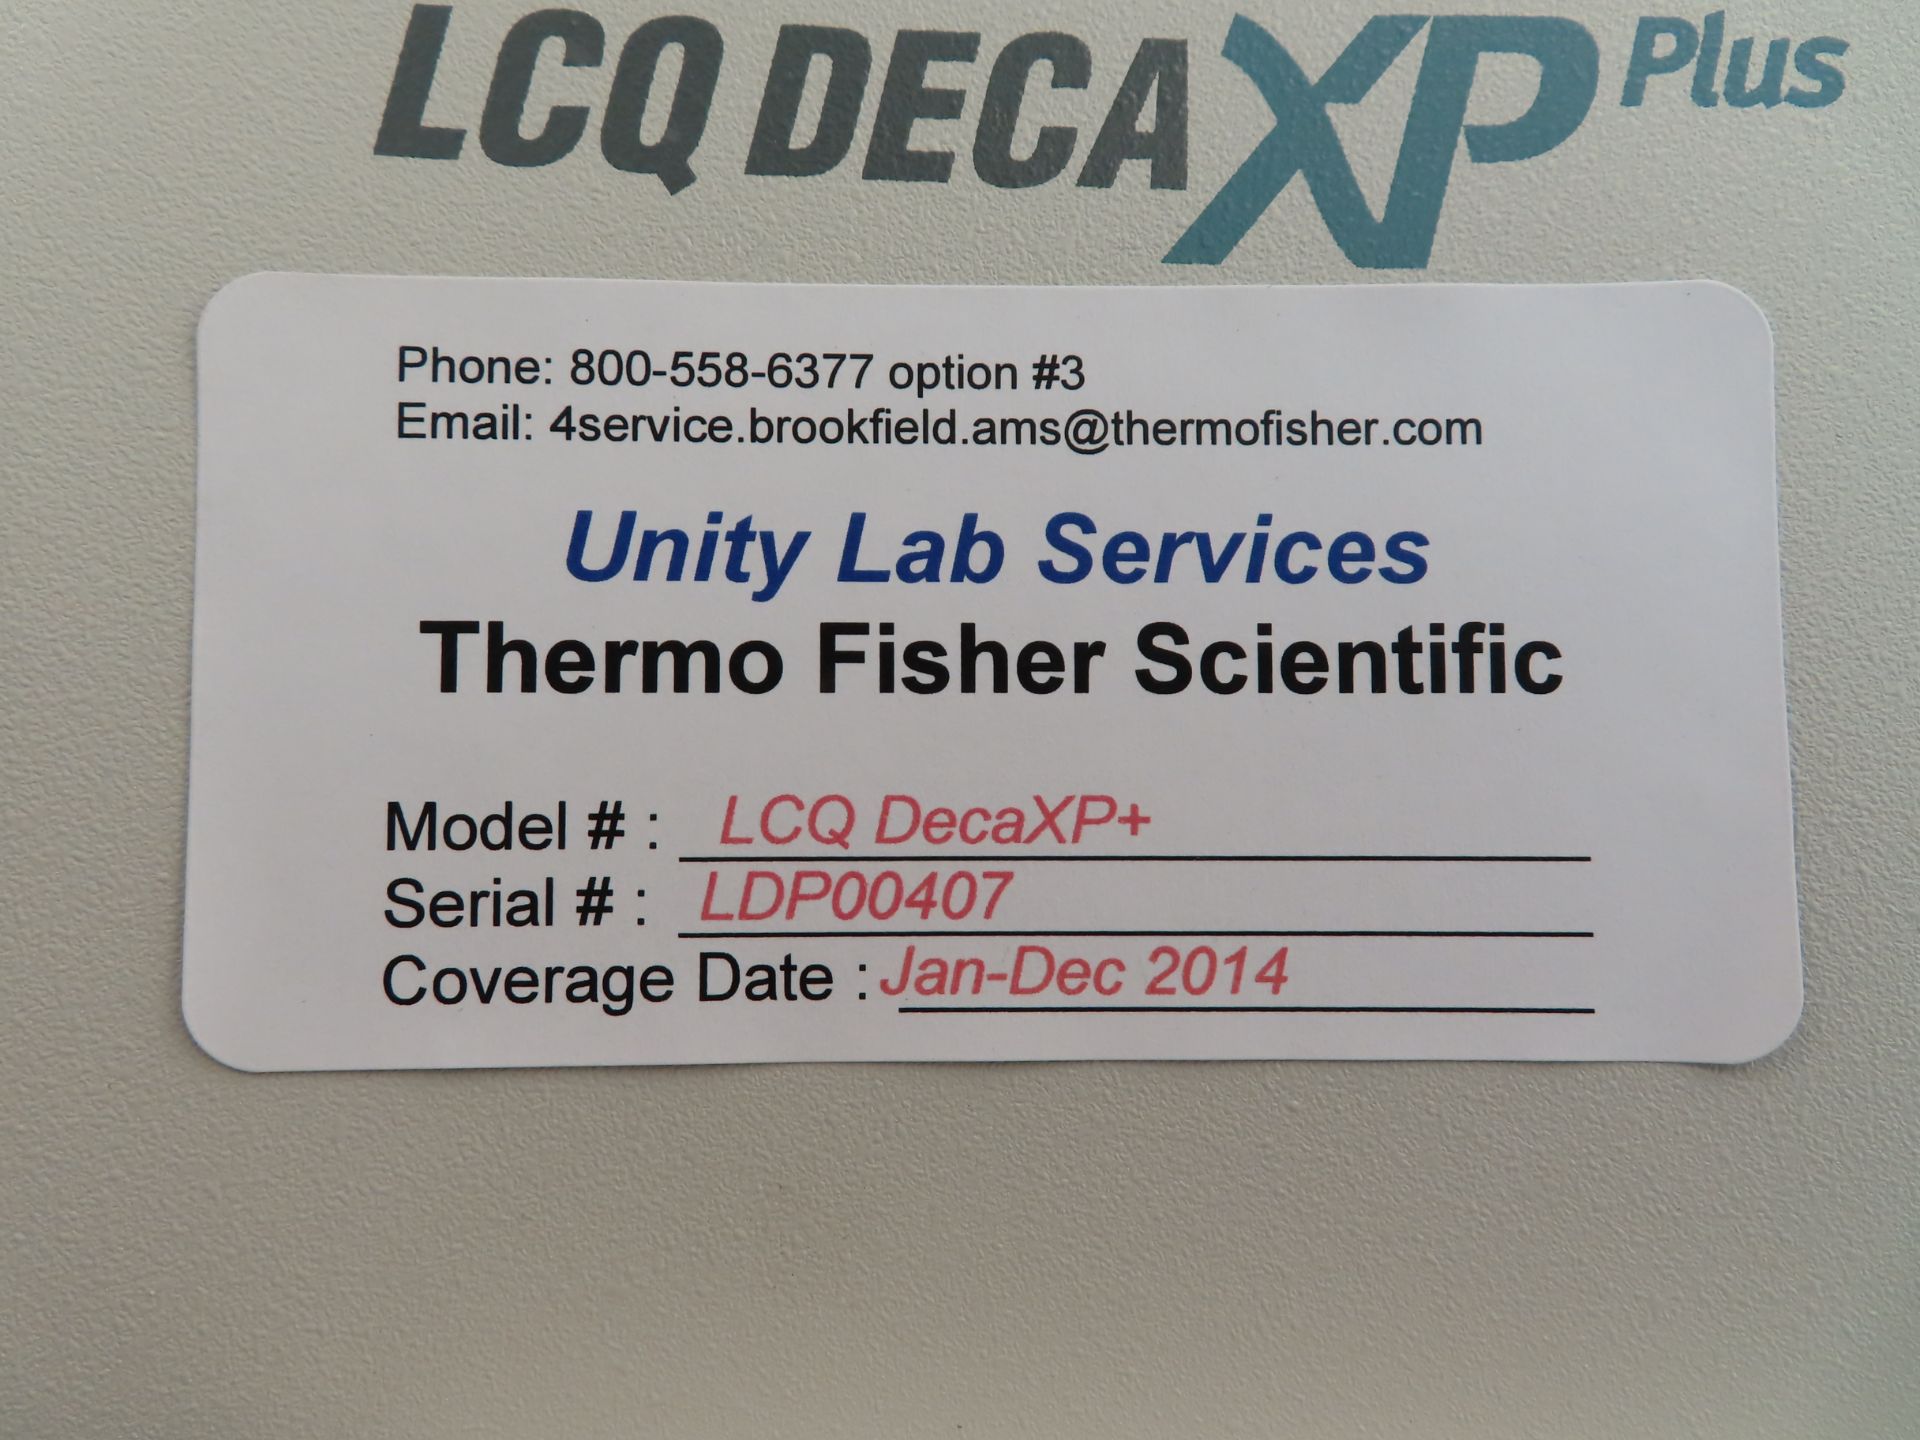 Thermo LCQ Deca XP Plus mass spectrometer, s/n LDP00407, located in B wing, 4th floor, room 449B - Image 2 of 2